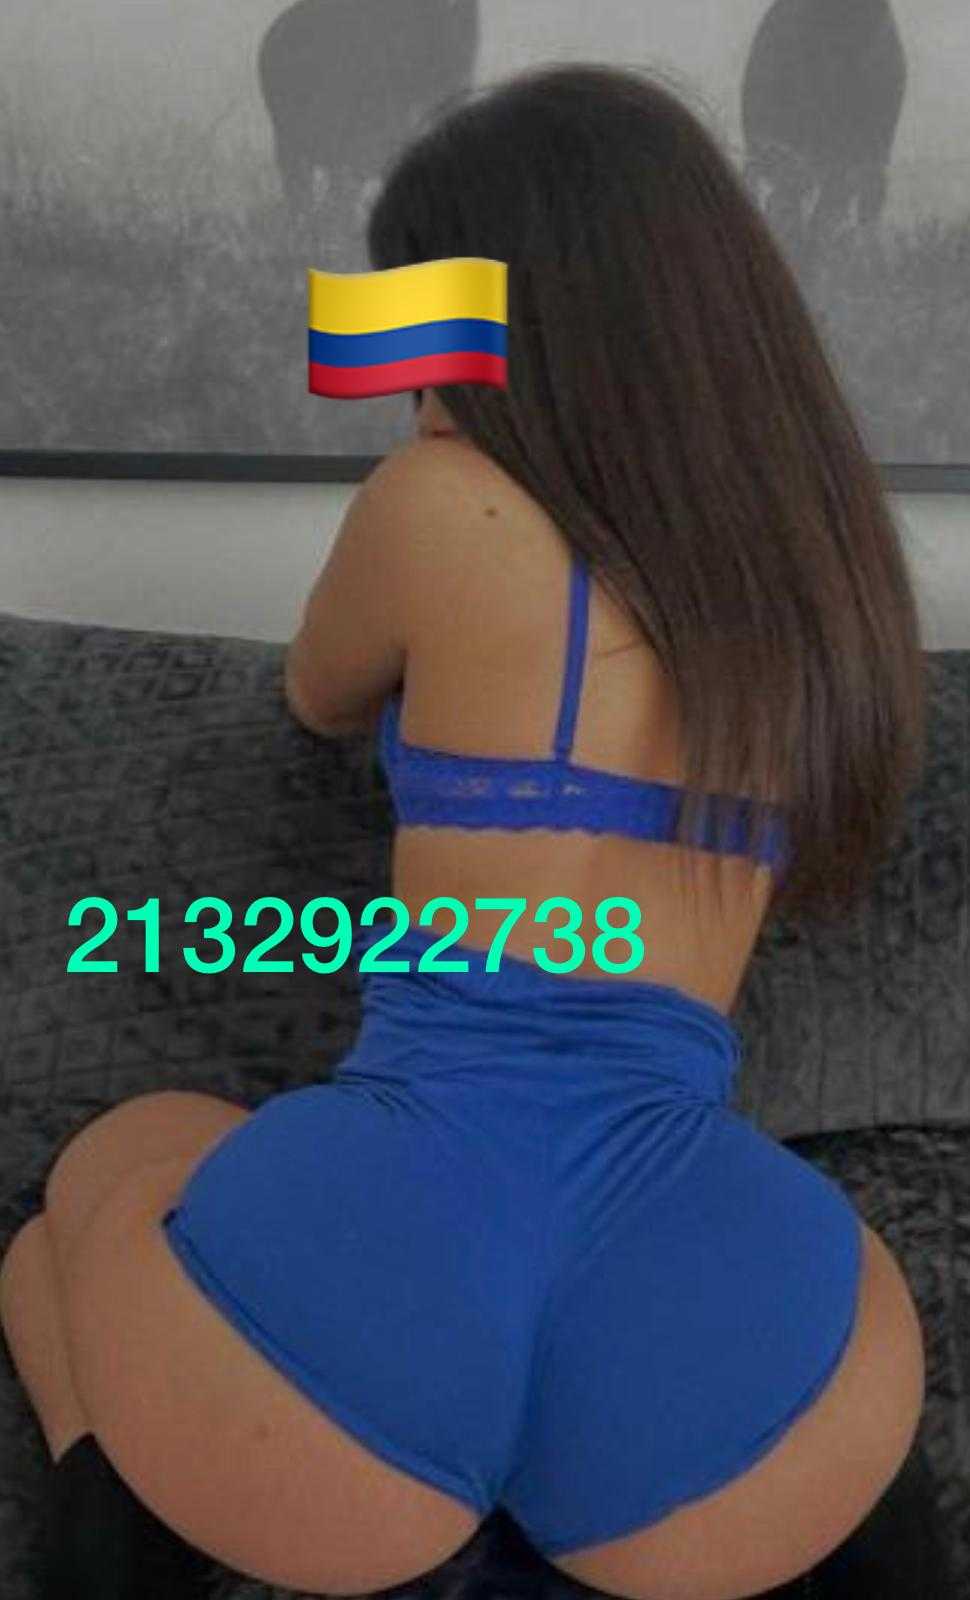 Reviews about escort with phone number 2132922738